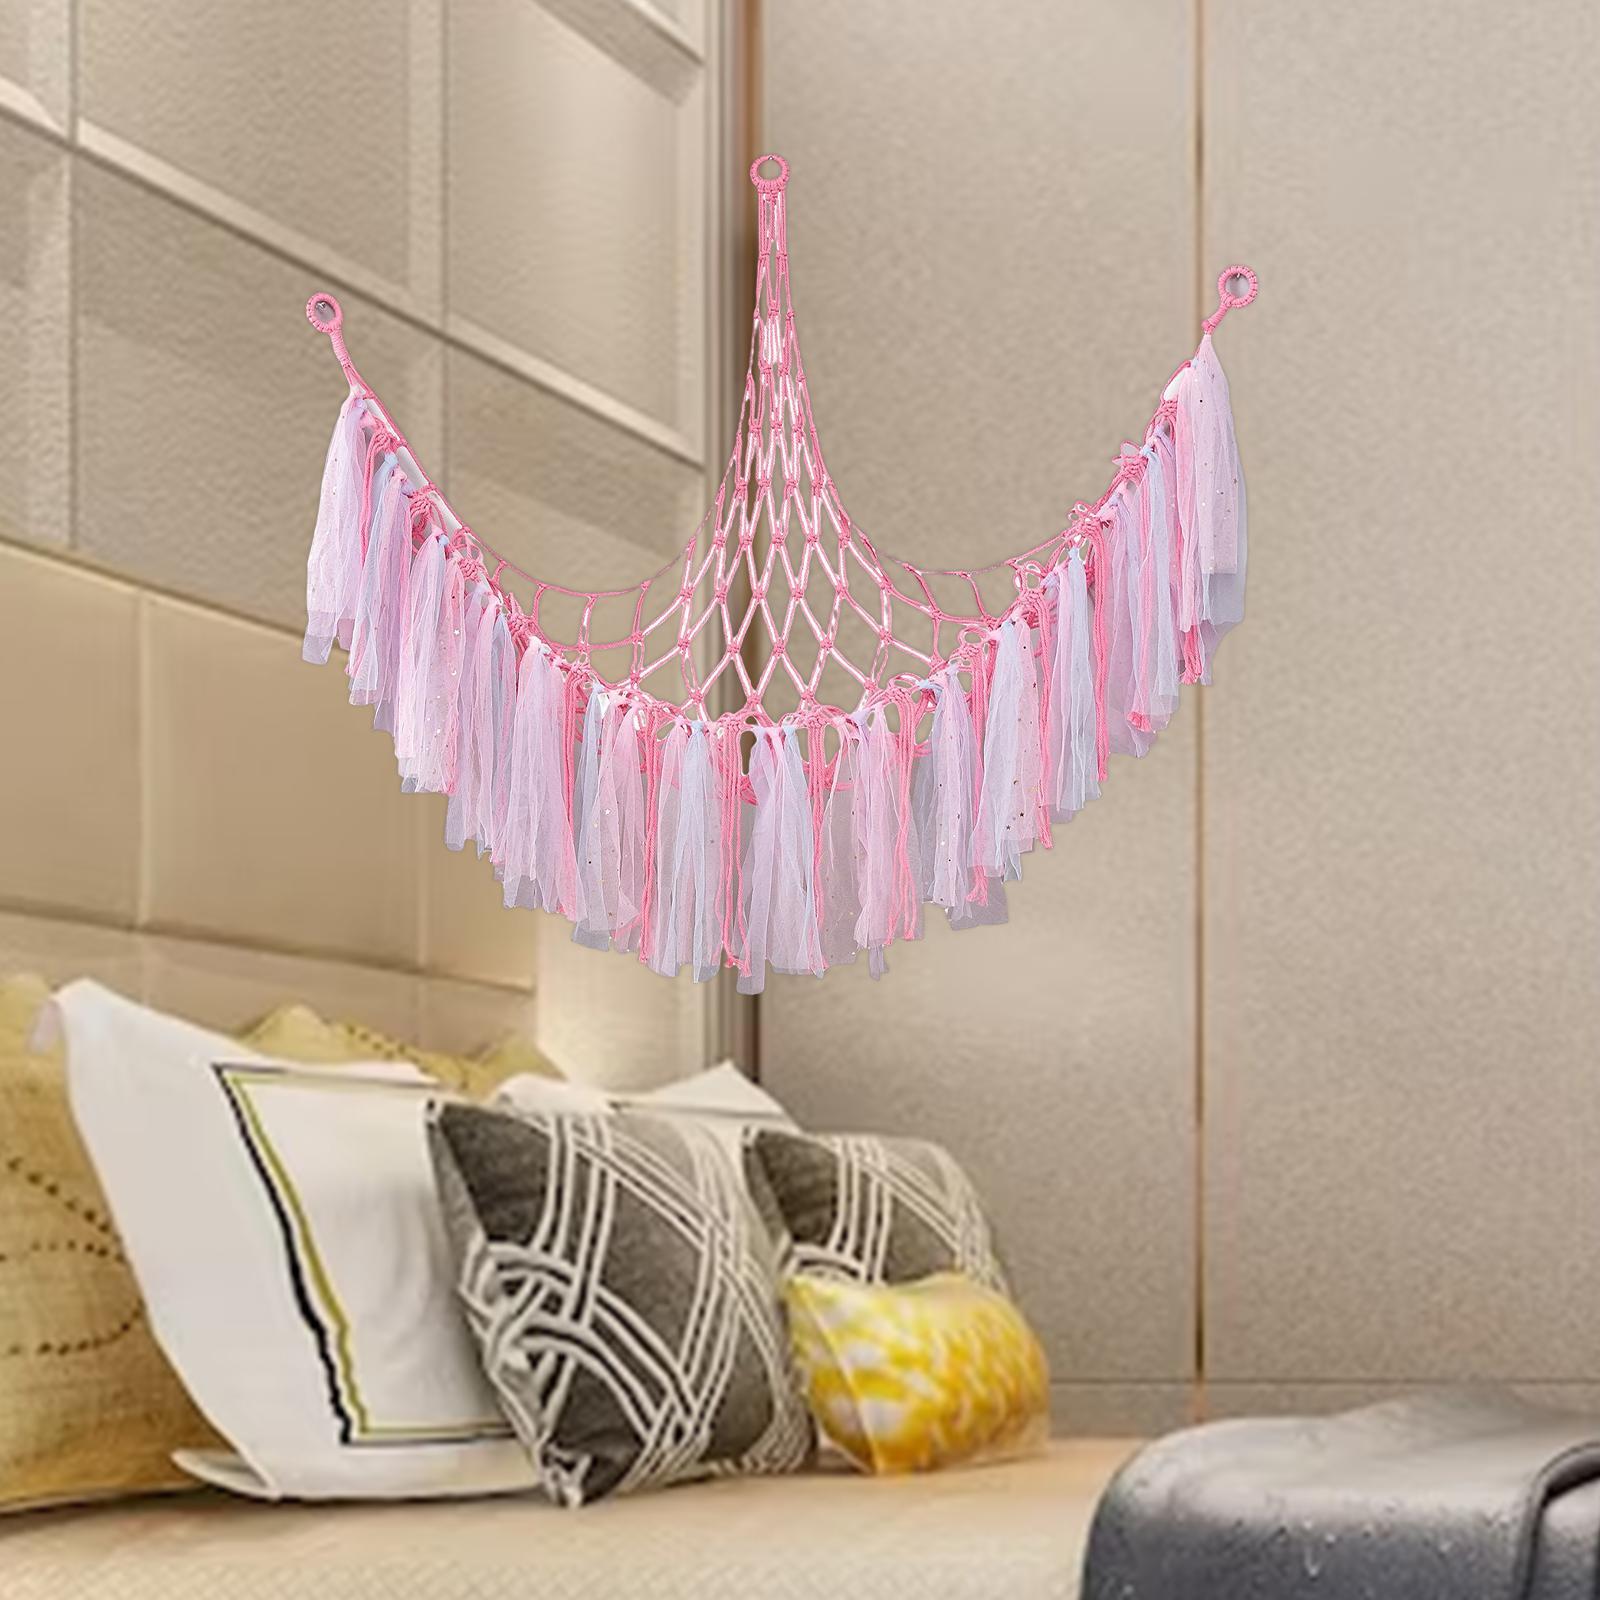 Creative Toy Hammock Wall Mounted Children Toy Holder with Tassels Decor